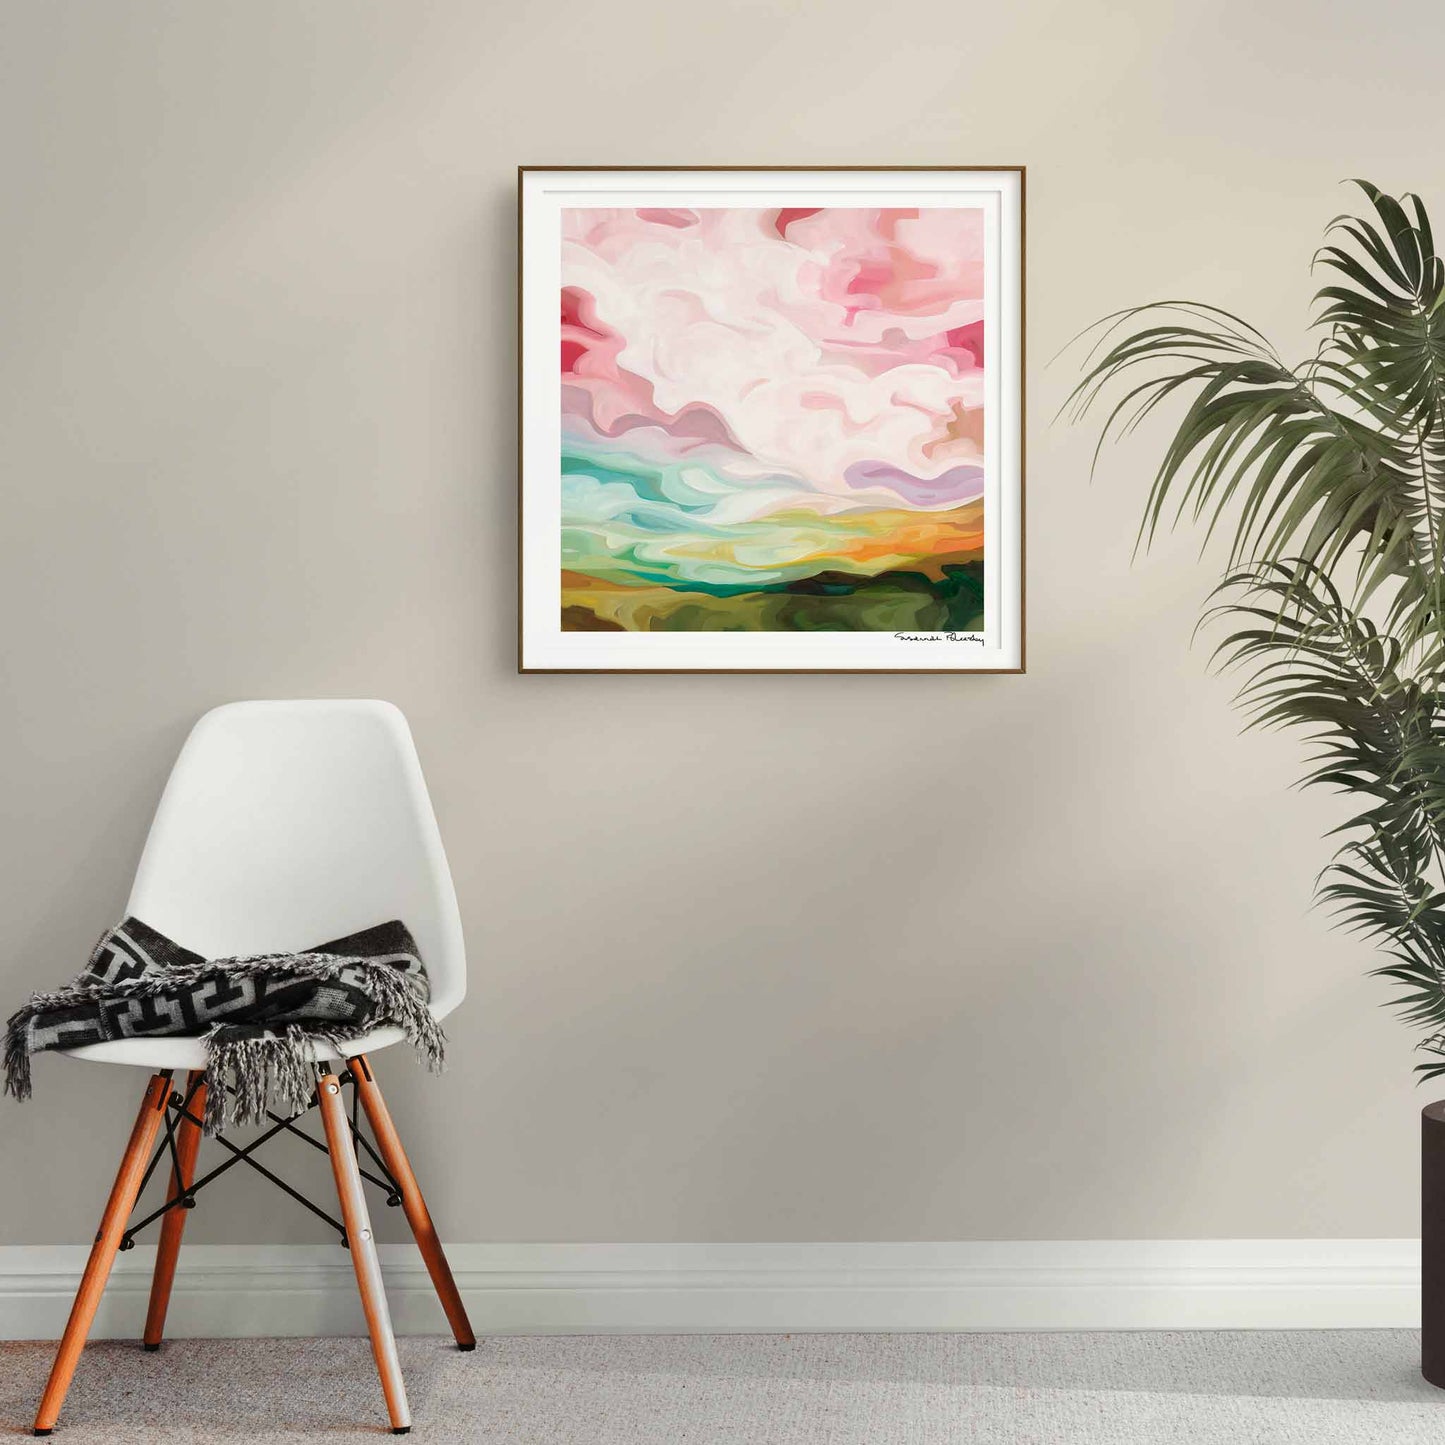 square fine art print of a pastel sunrise painting by Canadian abstract artist Susannah Bleasby